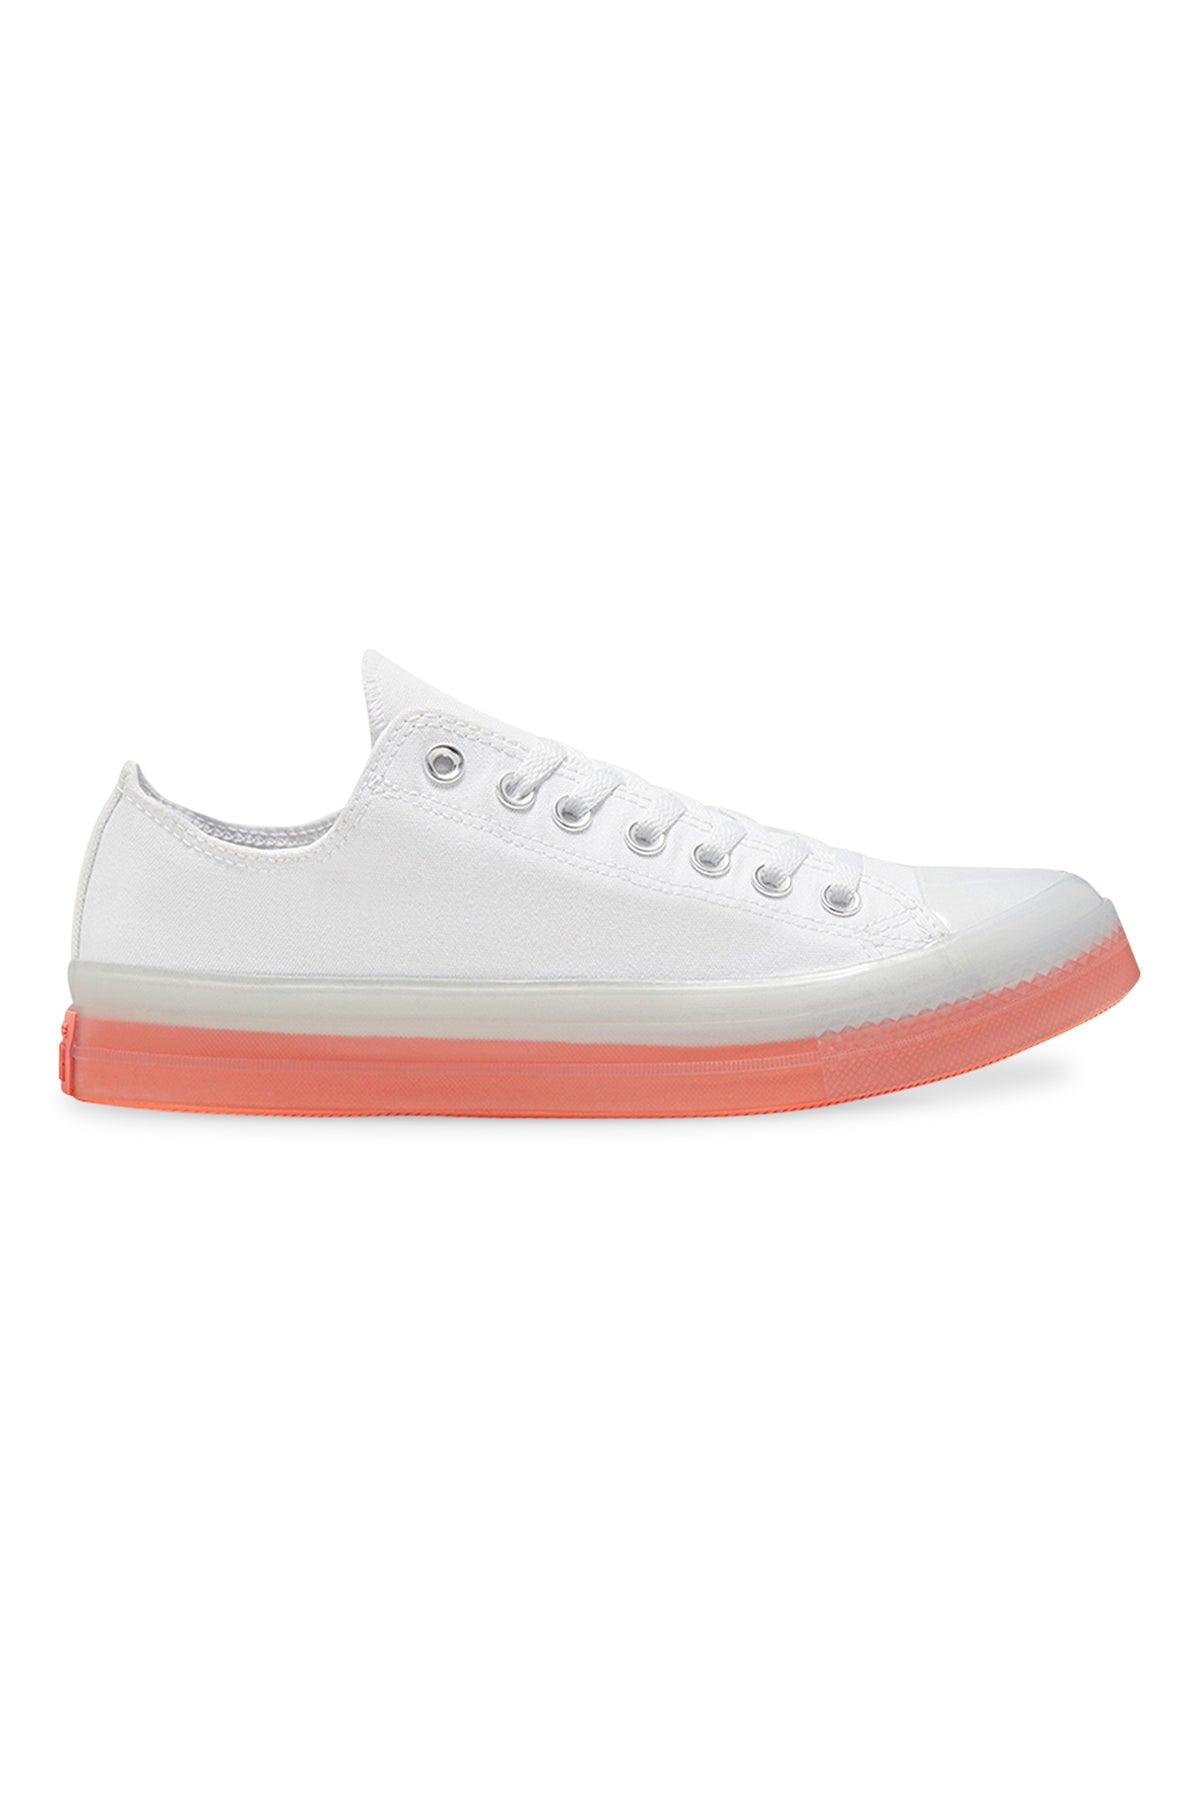 Converse CT CX Low Top White/Clear/Wild Mango Side